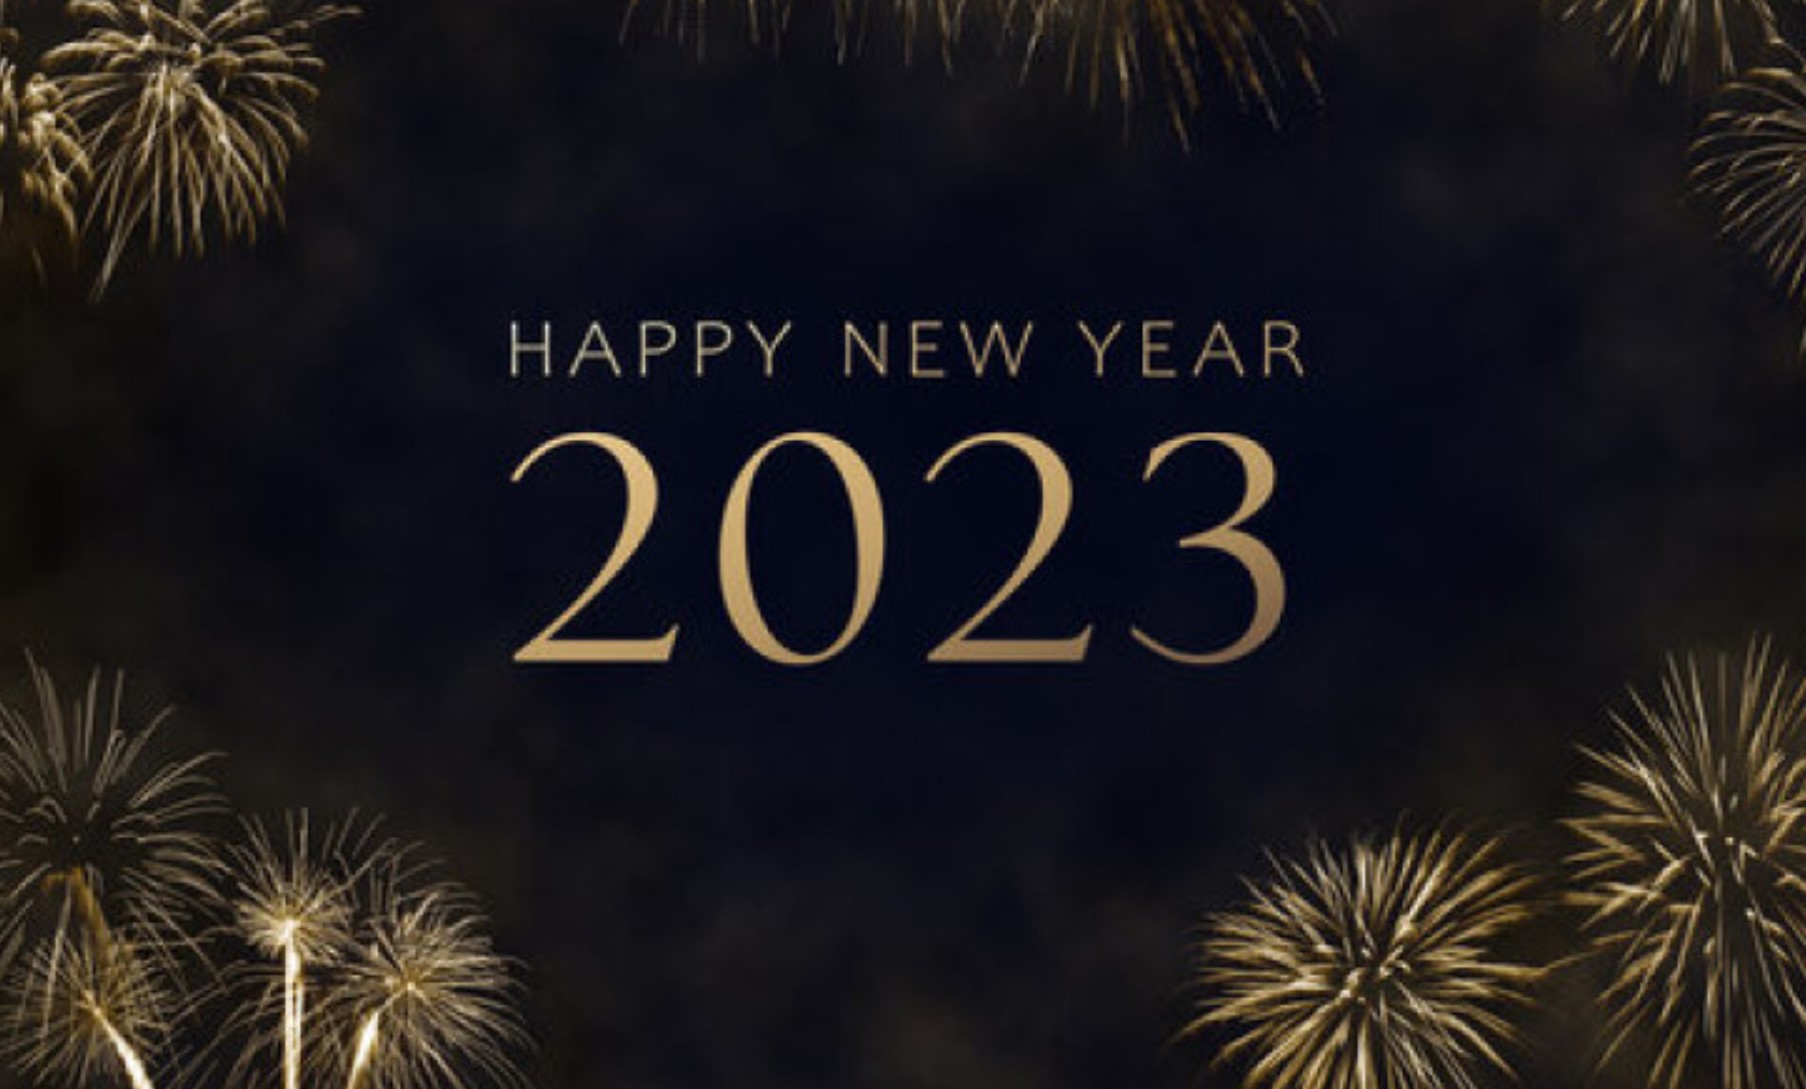 Congratulations on the occasion of the new year 2023